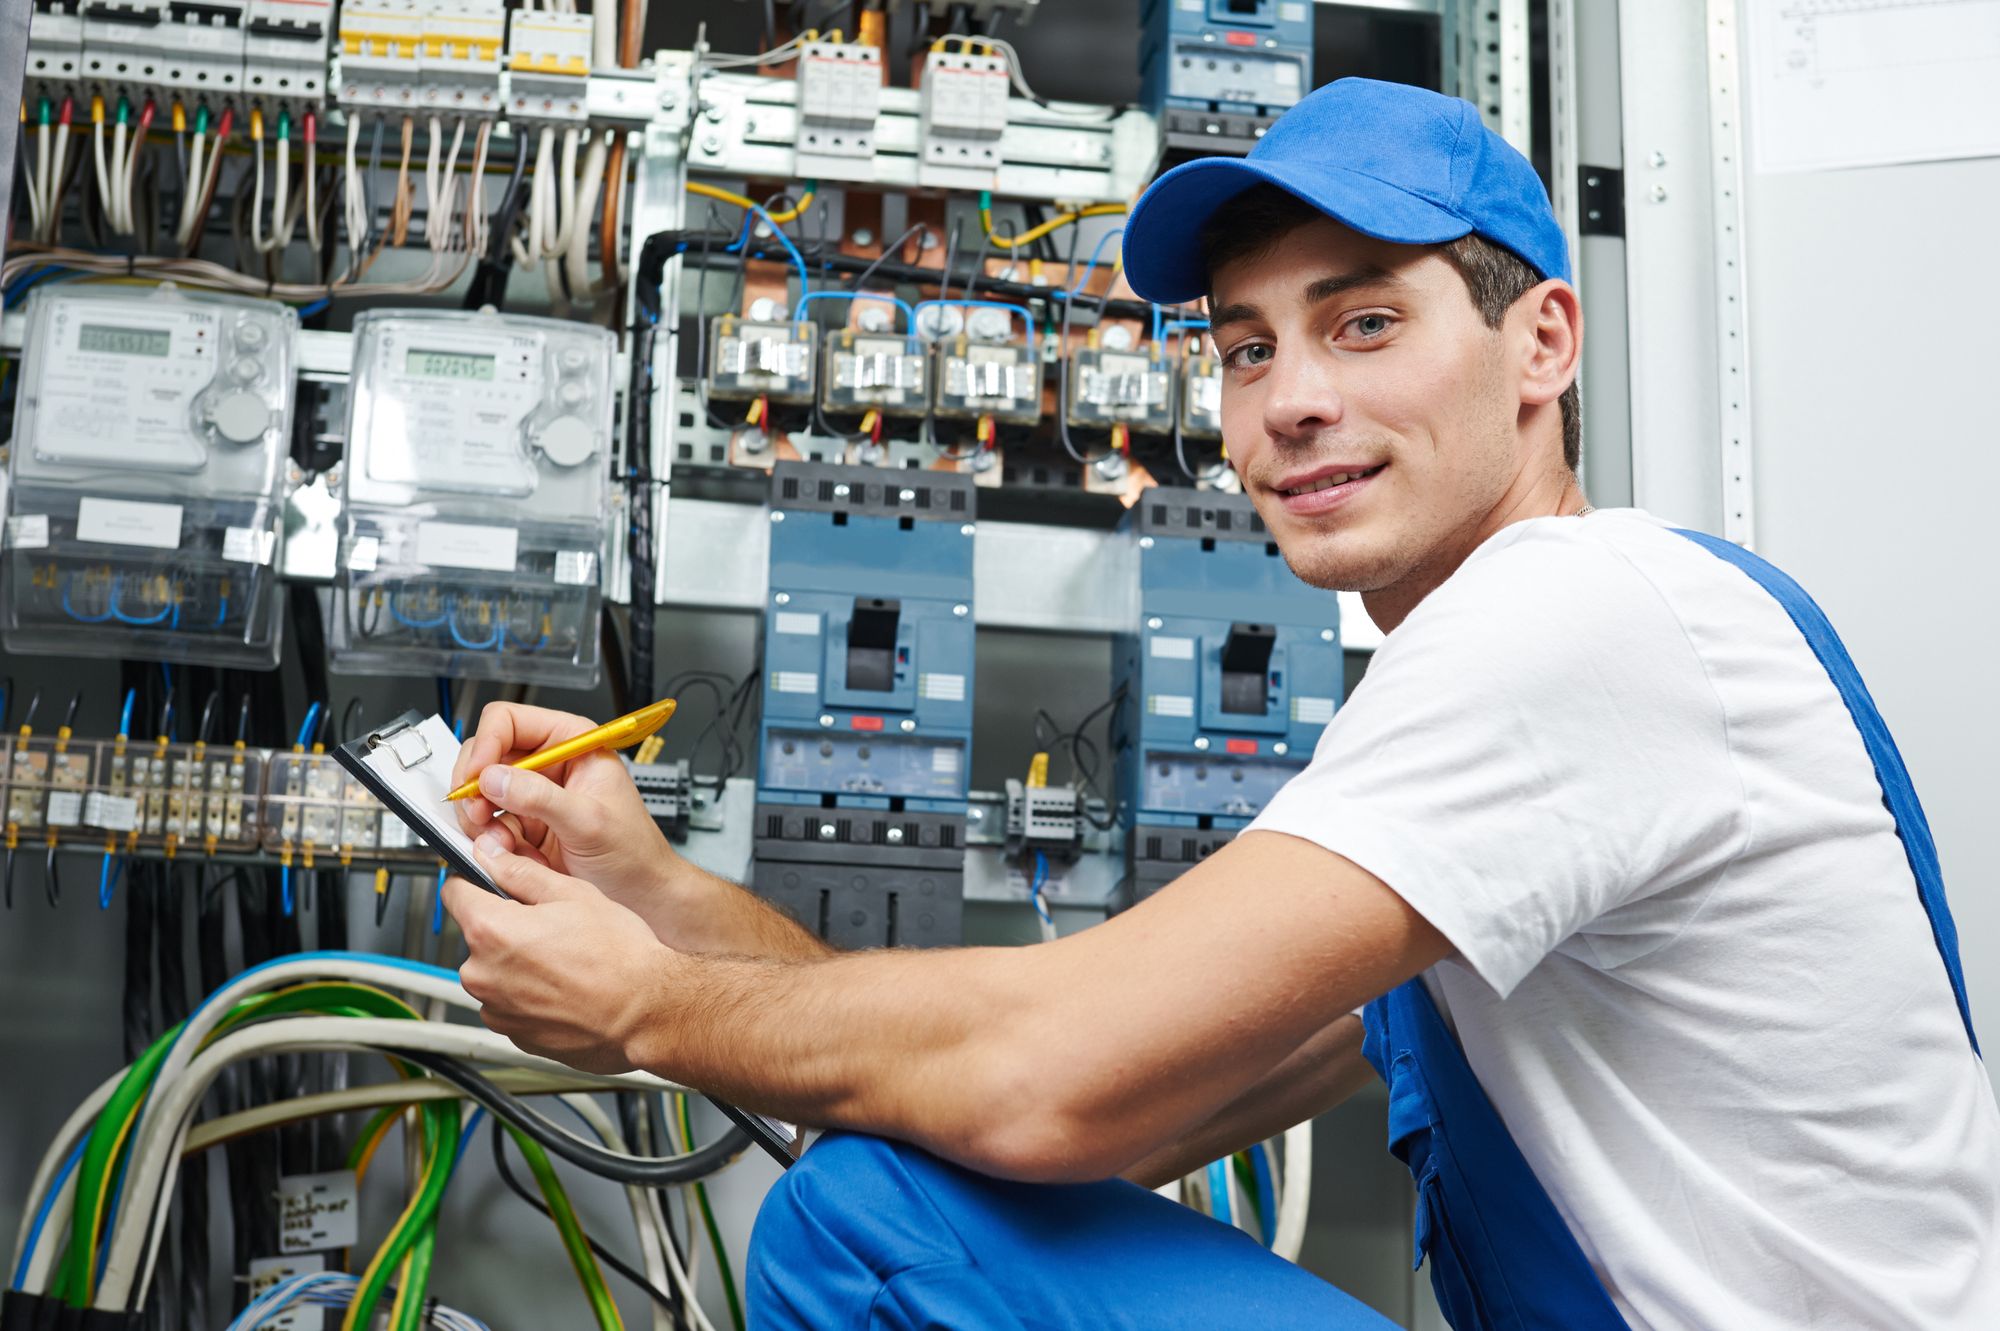 How To Choose The Best Electrician For Your Property